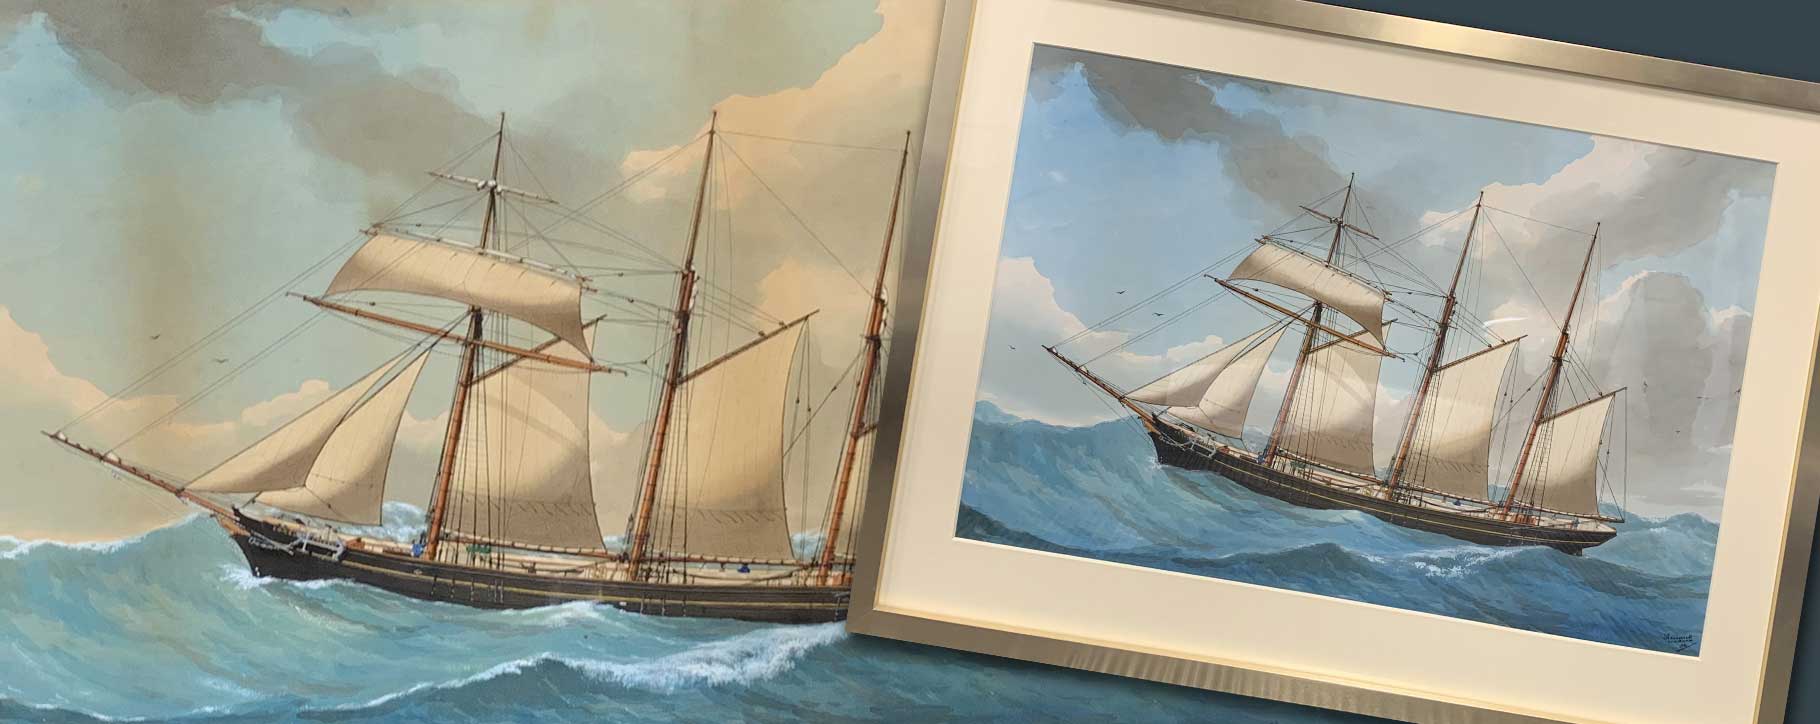 Before and after restoration of boat artwork